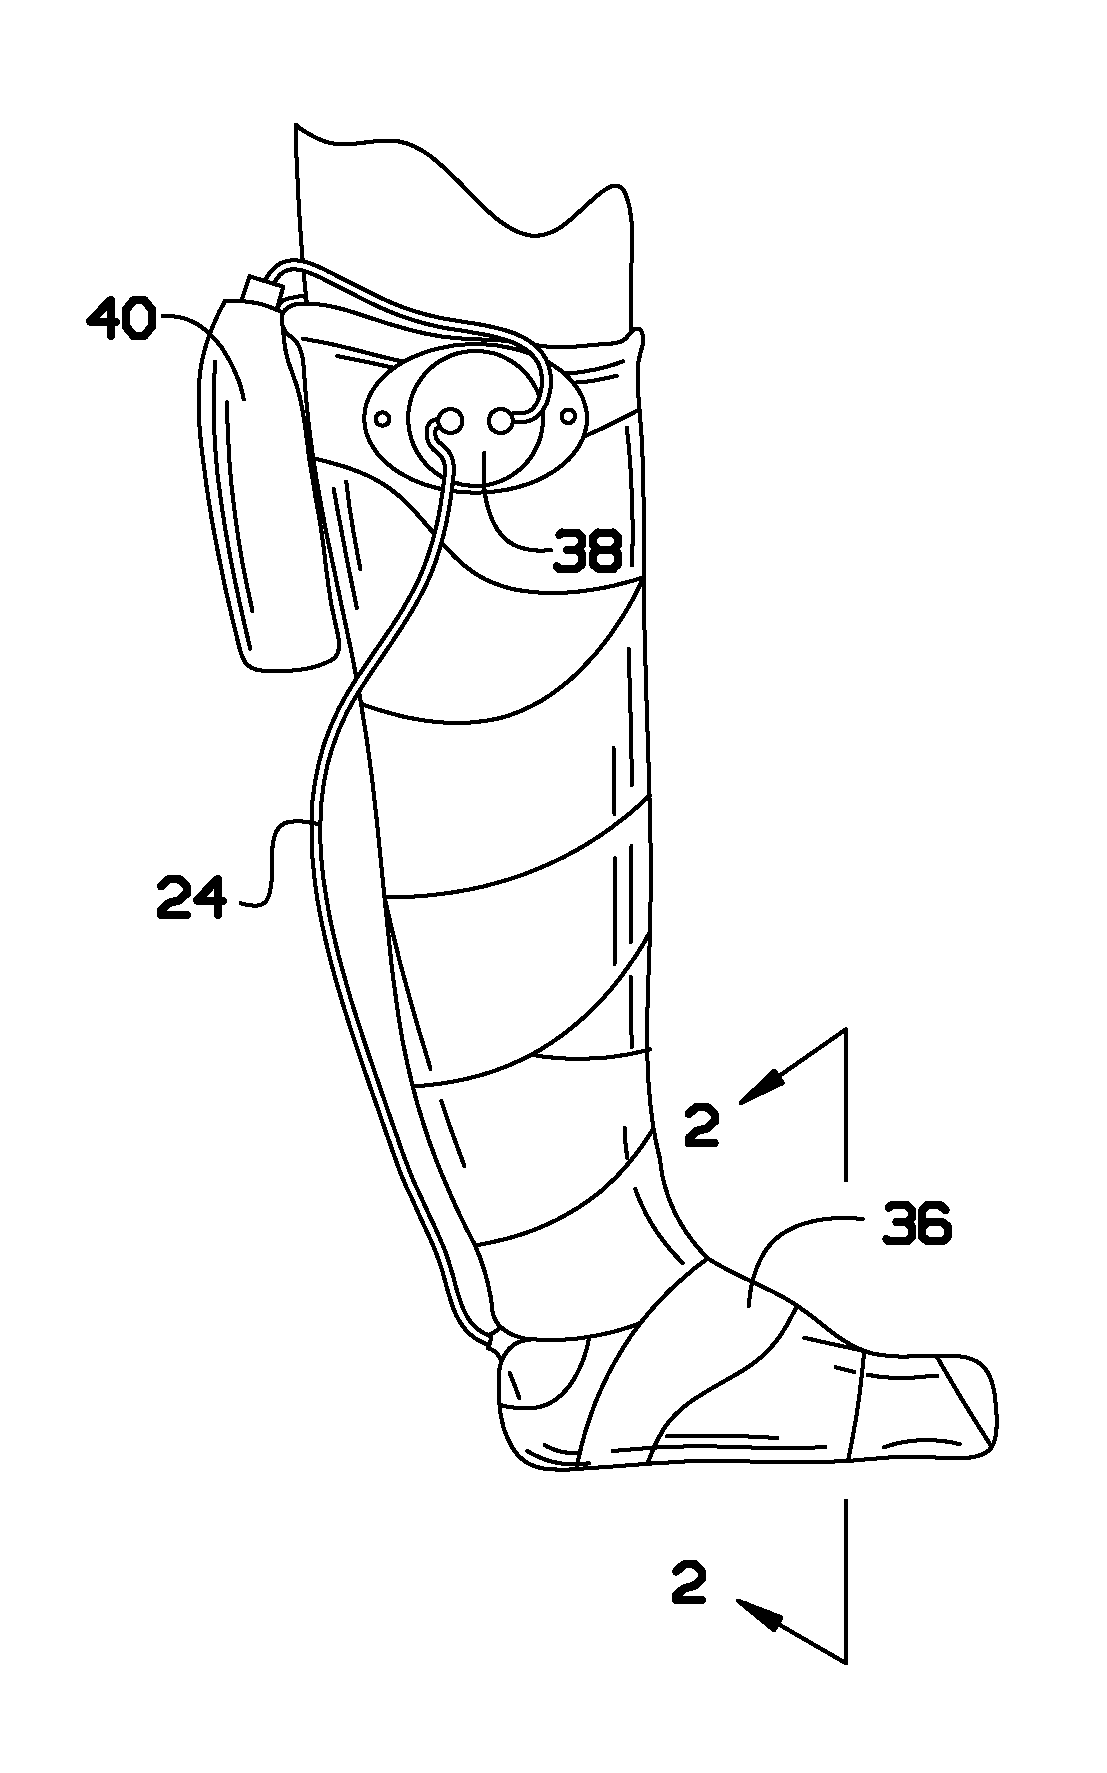 Vacuum cast ("vac-cast") and methods for treatment of plantar wounds